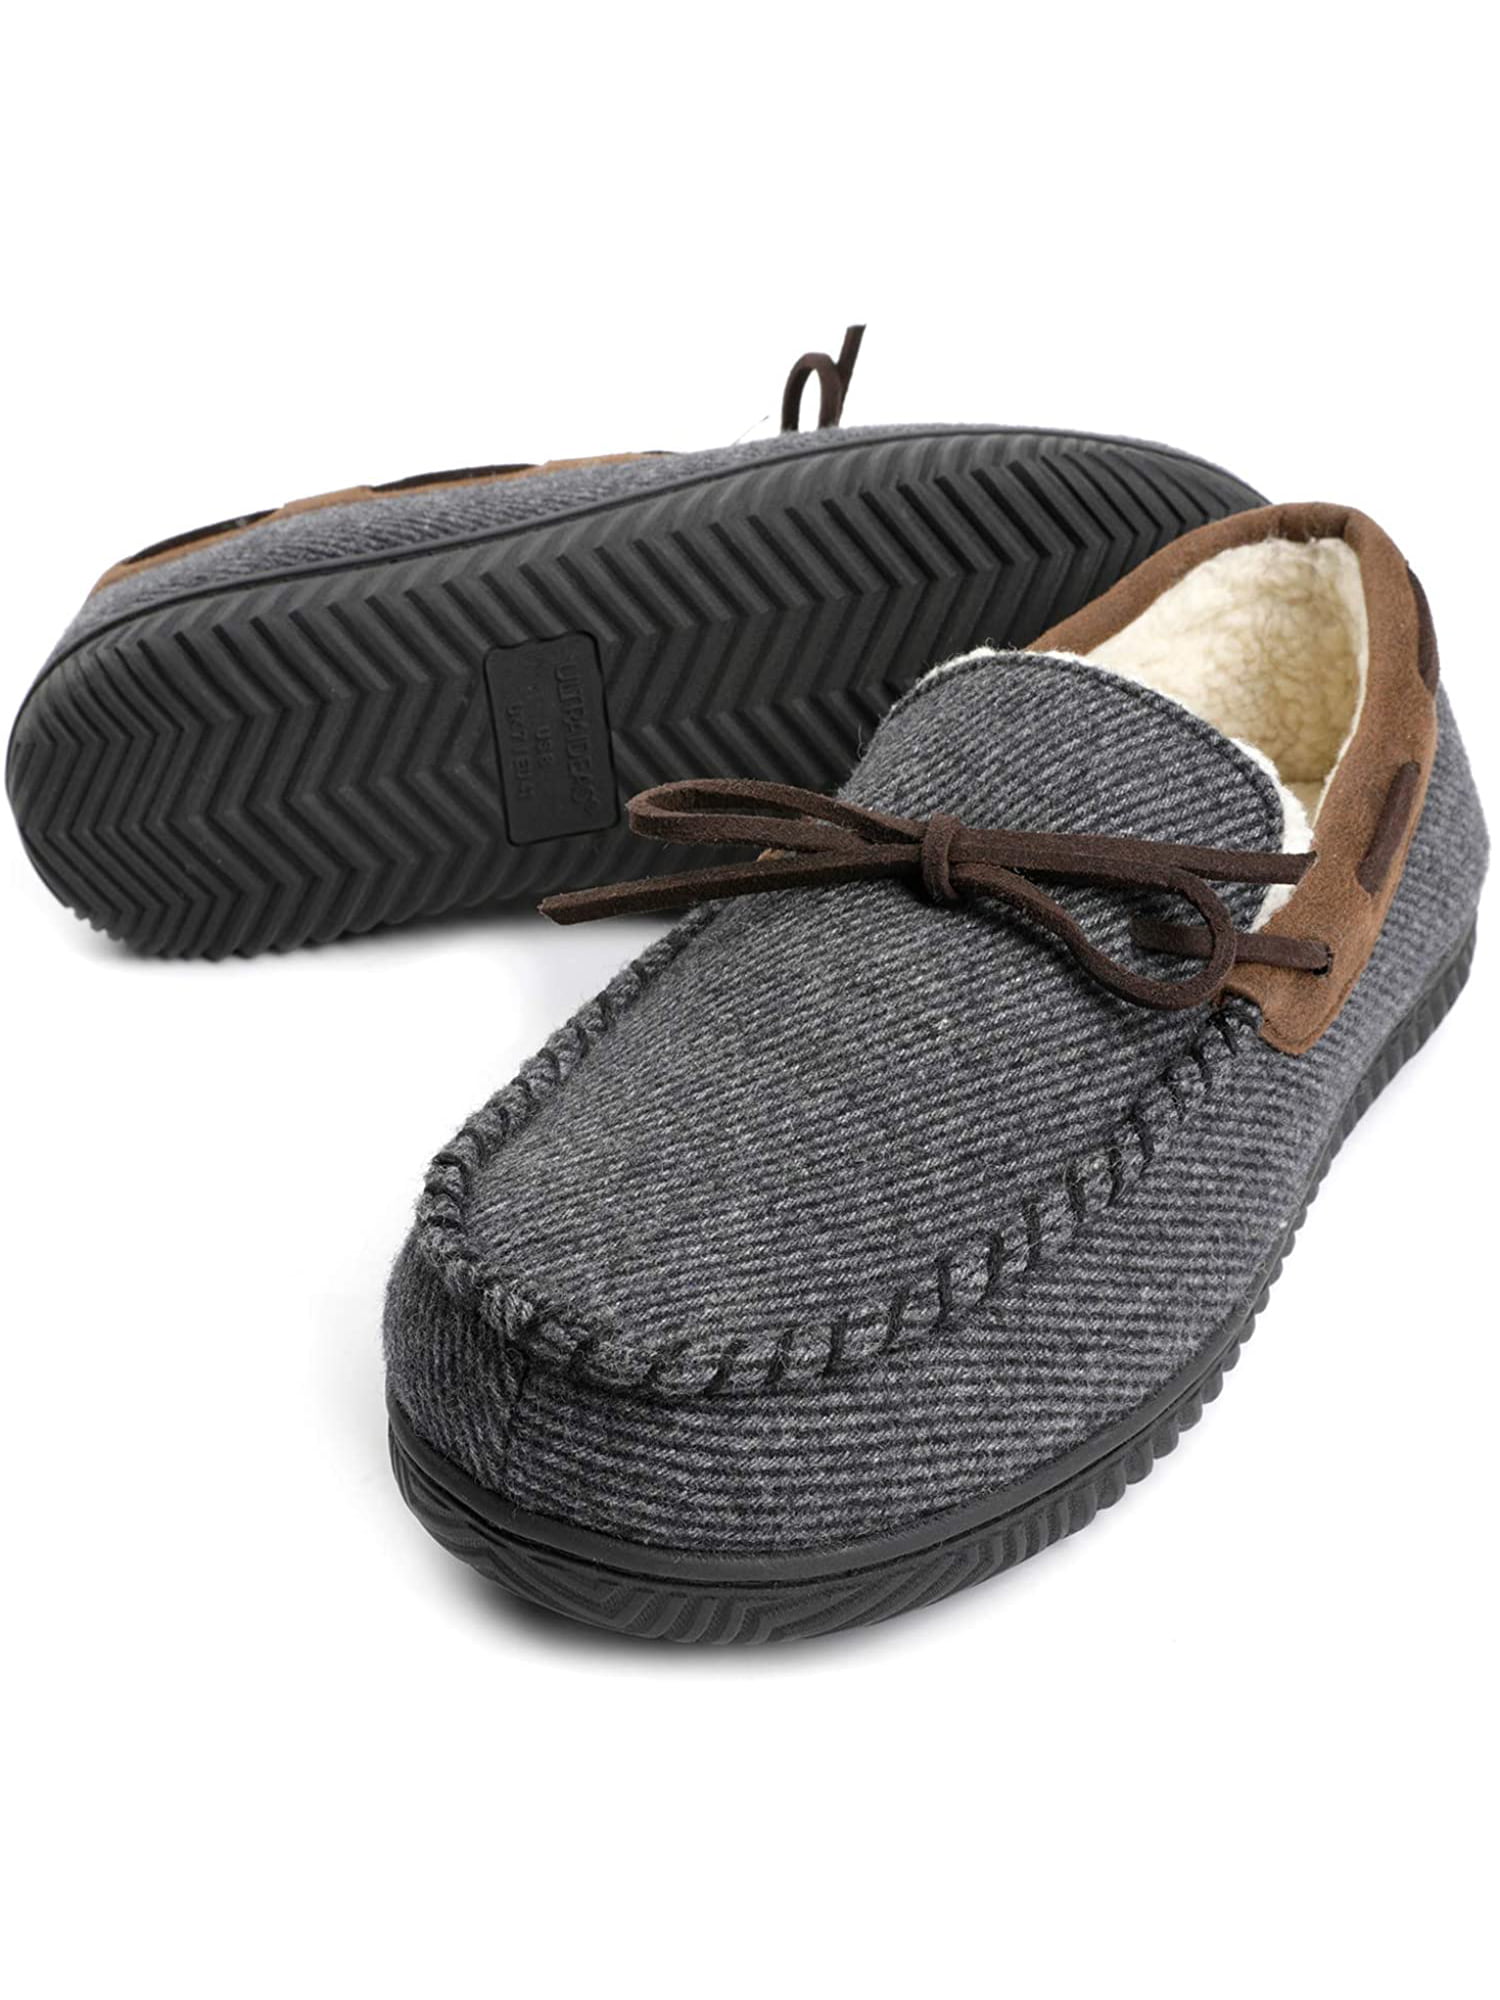 moccasin slippers with rubber sole